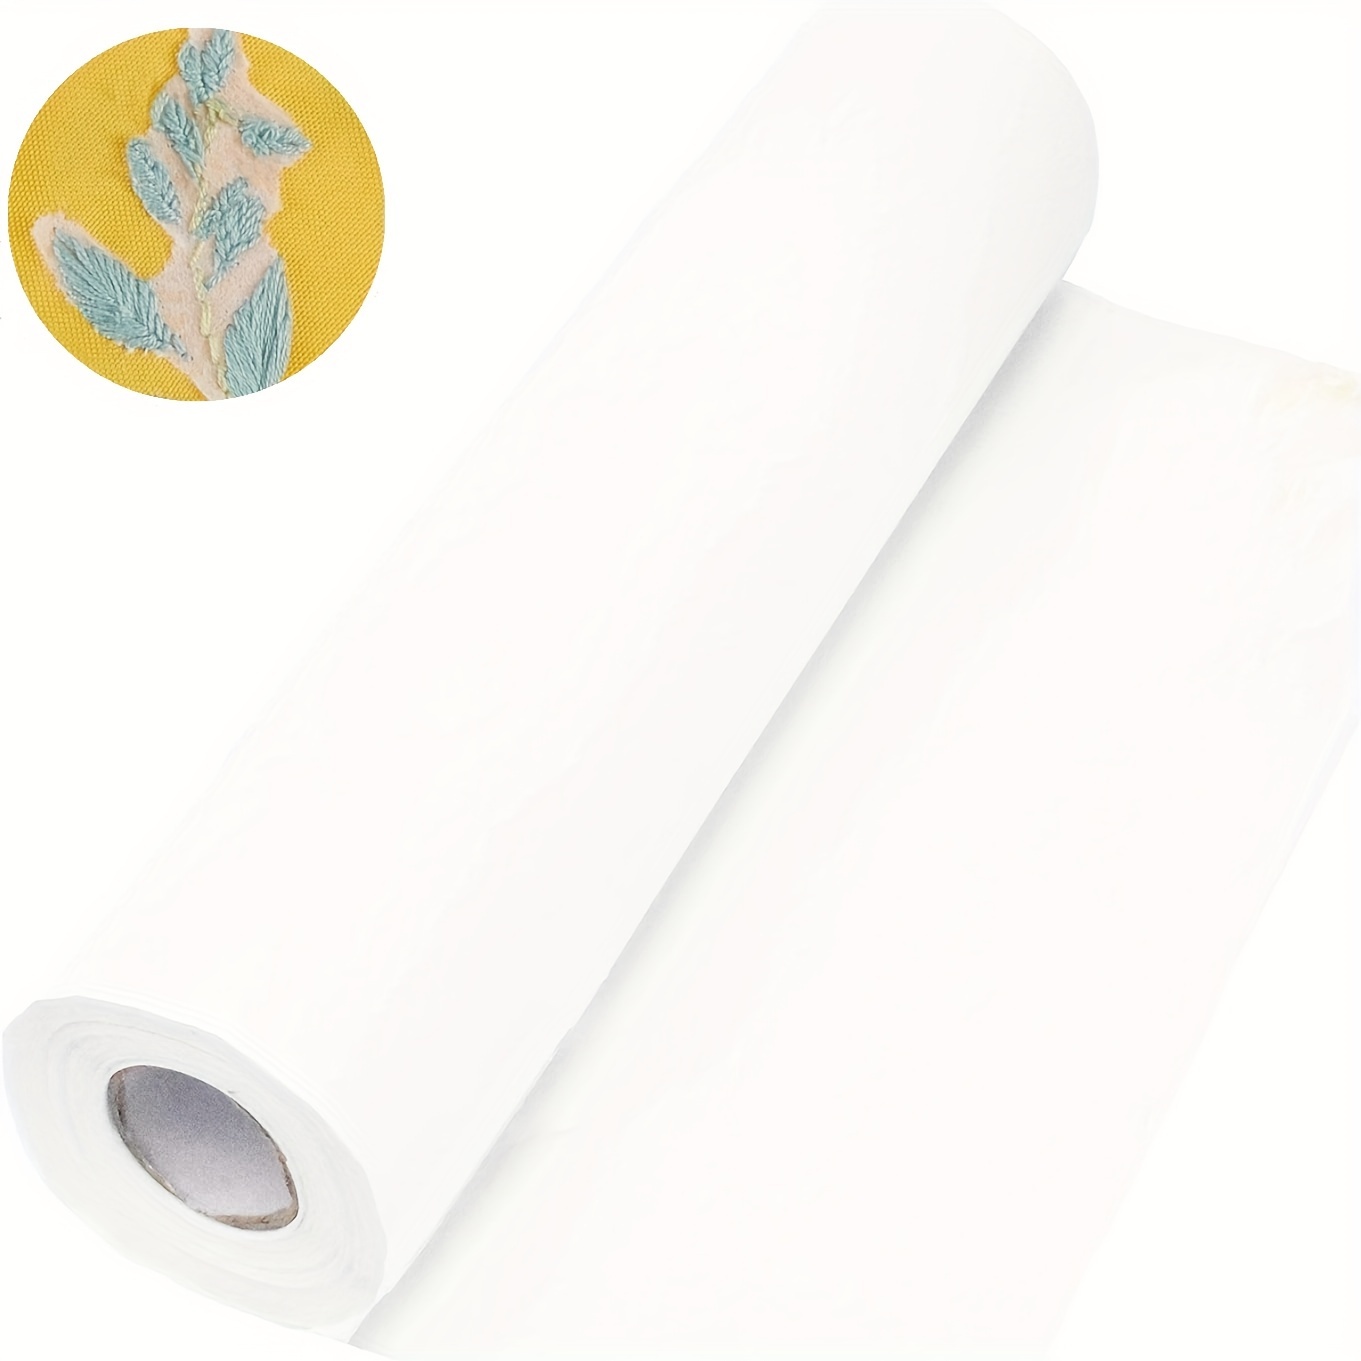  2 Rolls 12'' x 50 yd Tear Away Embroidery Stabilizer, 1.8 Ounce  Medium Weight Embroidery Backing for Machine Embroidery Hand Sewing Support